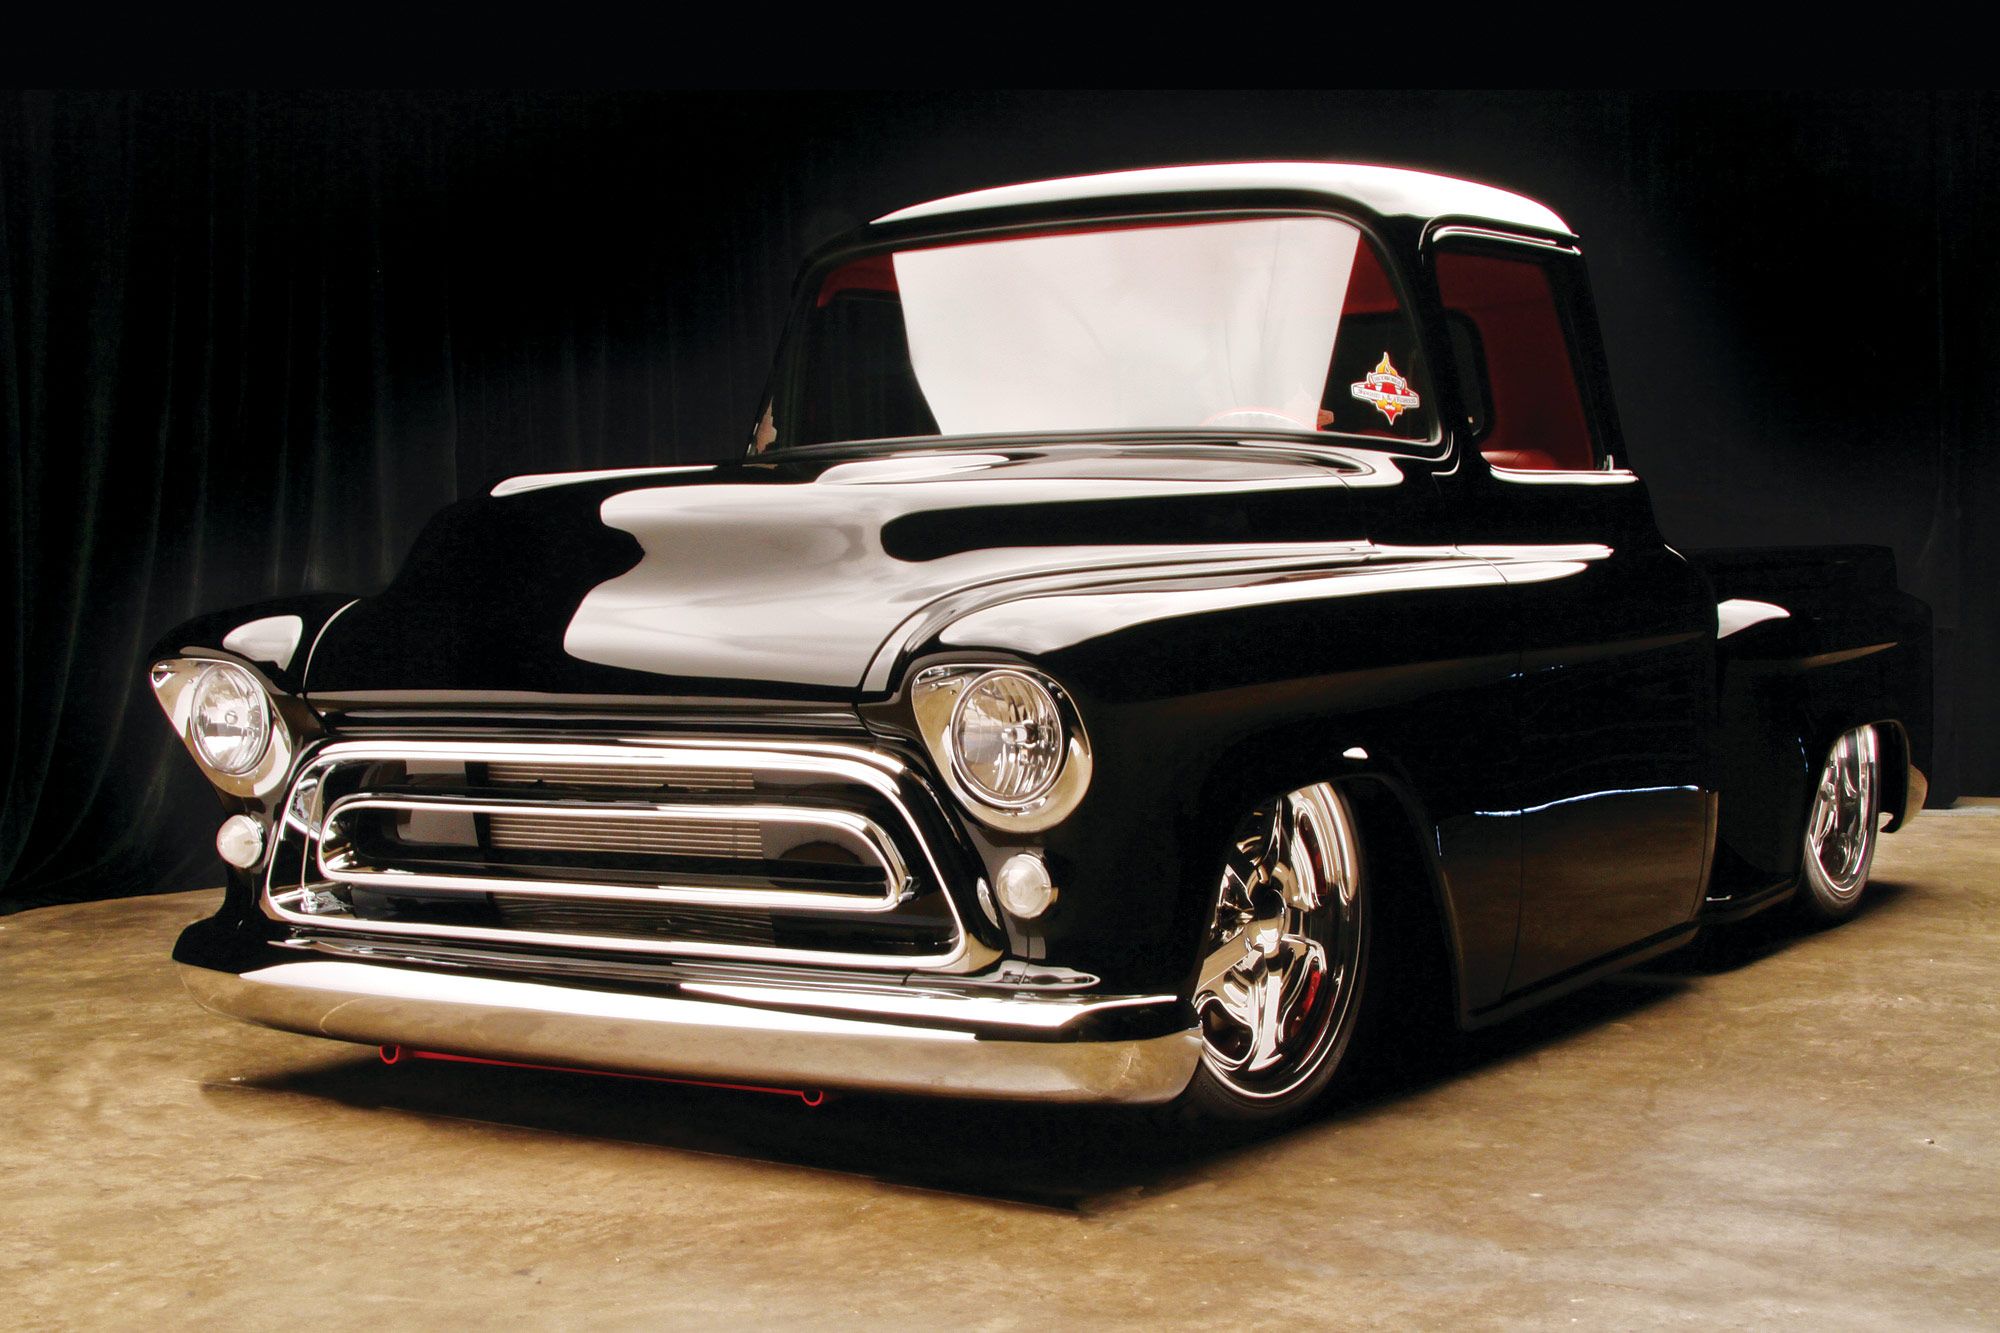 28 Latest Chevy Truck Backgrounds TXI81 4K Ultra HD Wallpapers